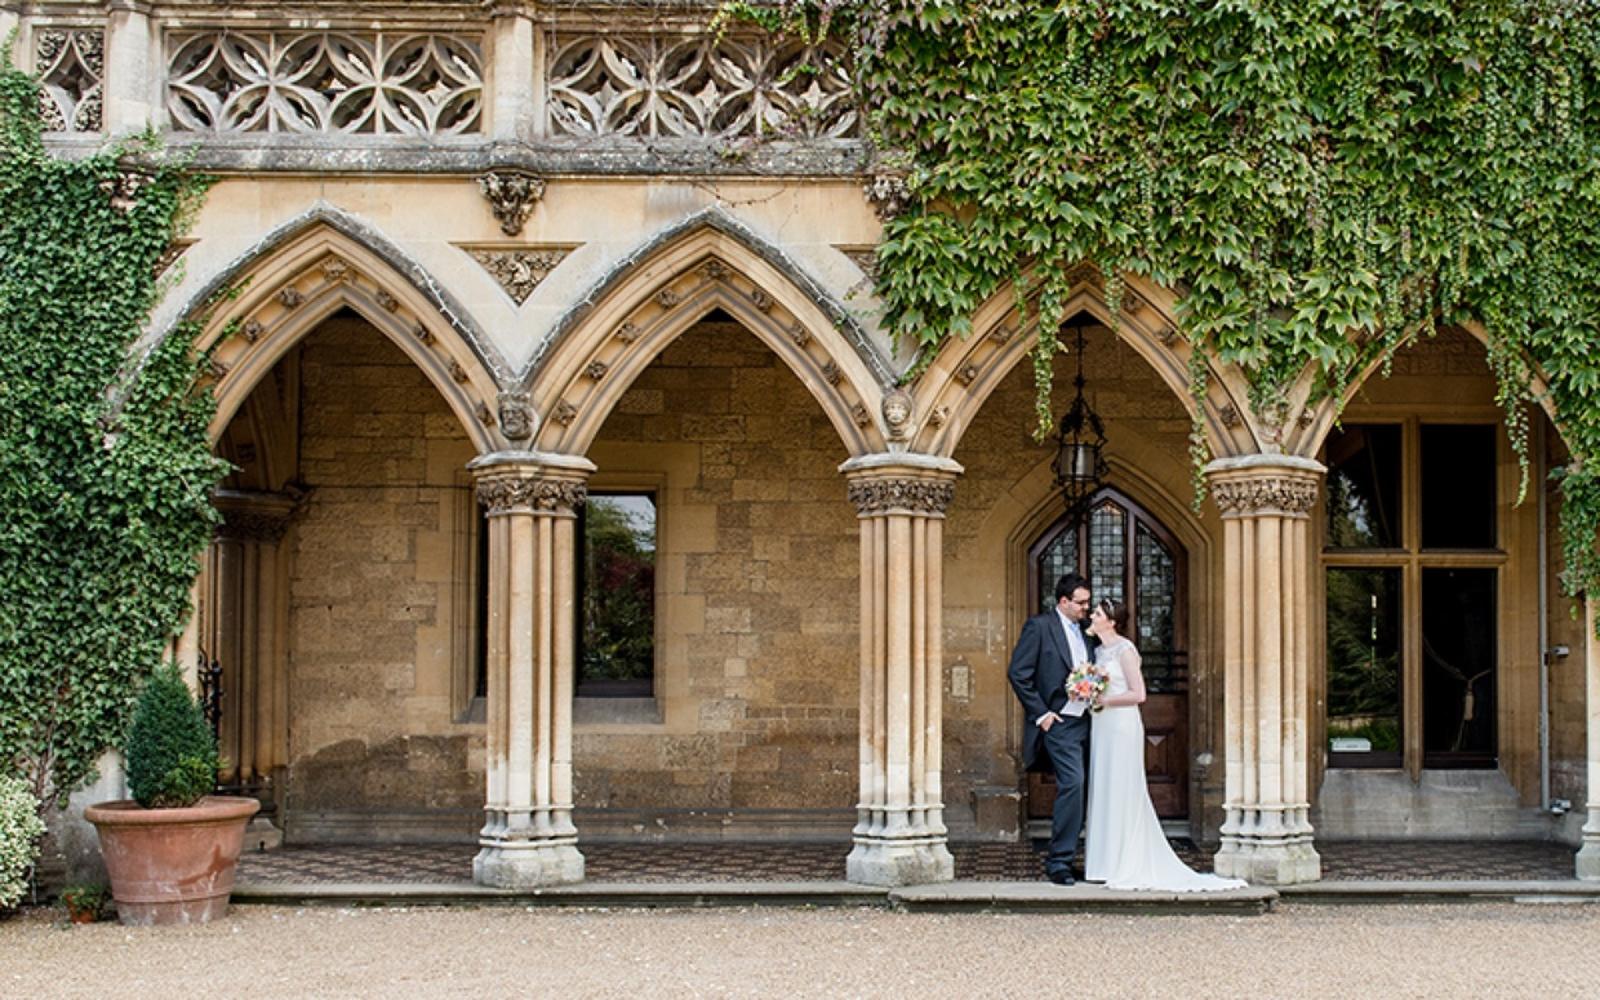 Capture Every Moment Real Wedding photographer Cirencester Manor by the Lake Cheltenham Cotswold stone